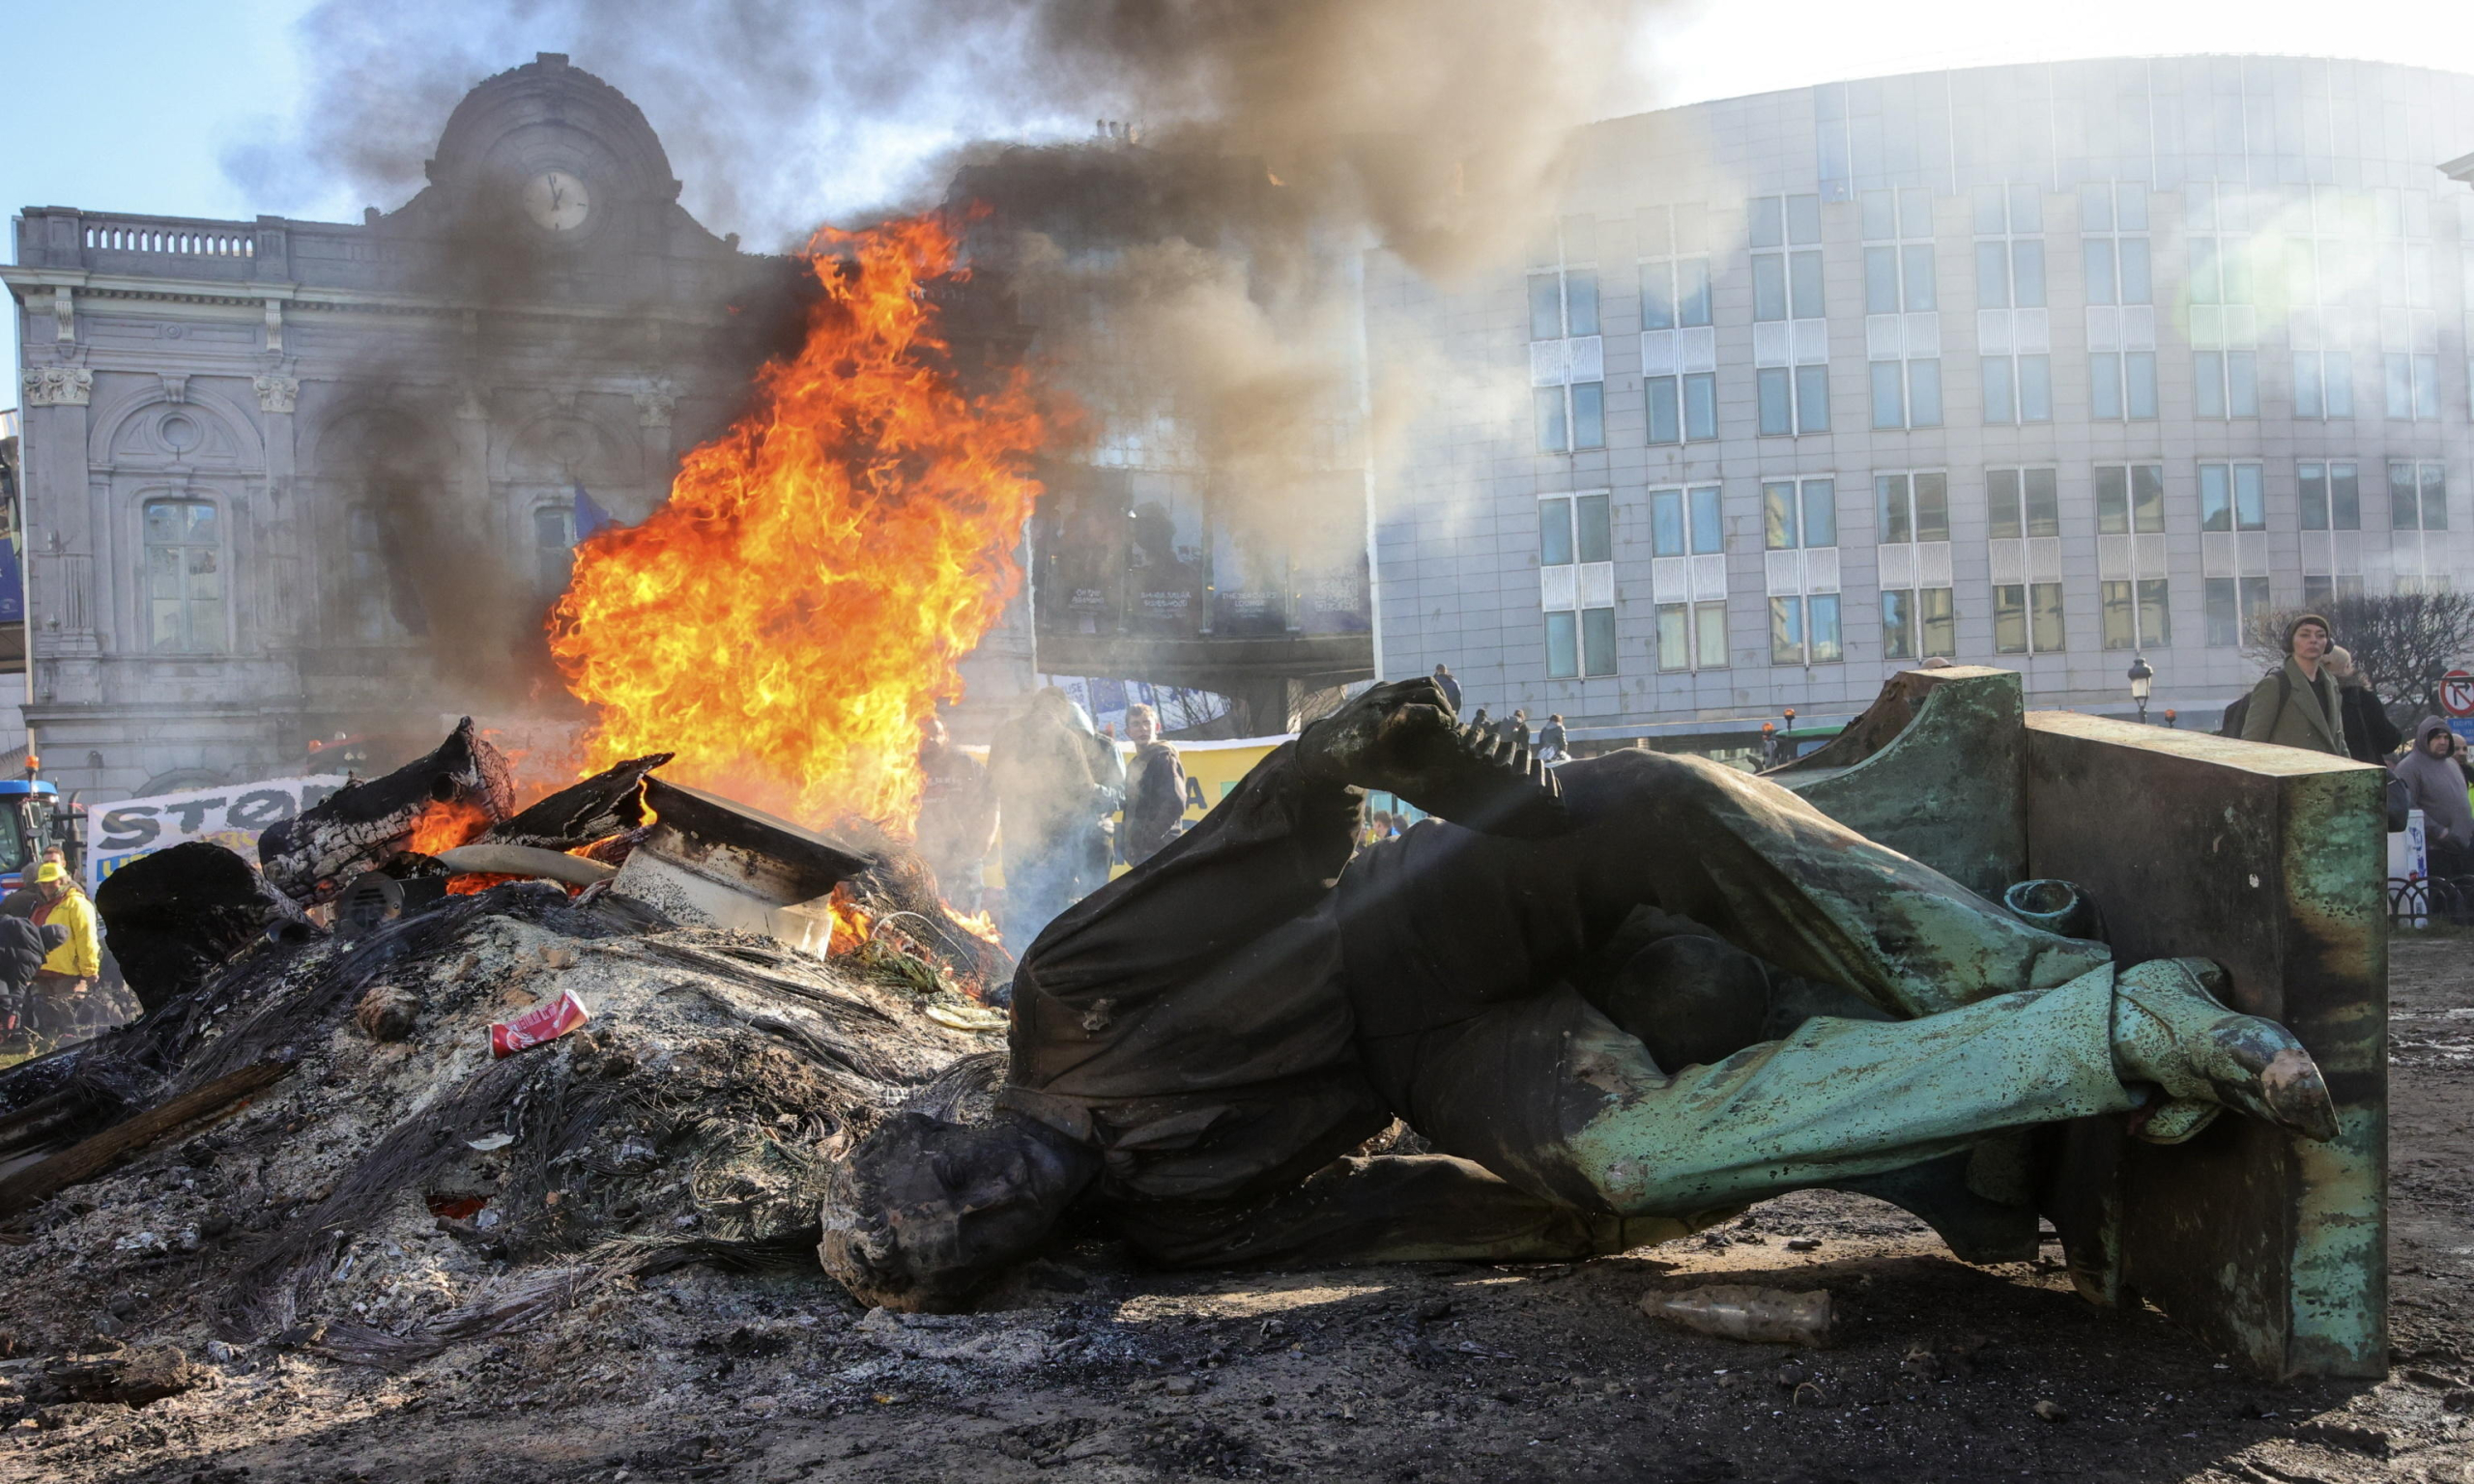 epa11117971 A statue lies on the ground as a fire burns during a farmers' protest in front of the European Parliament on the sidelines of a EU summit in Brussels, Belgium, 01 February 2024. Several hundred tractors are expected to converge on Brussels on the sidelines of a European leaders' summit on 01 February, the Walloon Federation of Agriculture (FWA) announced. Farmers are protesting to highlight their declining incomes, overly complex legislation and administrative overload. The discontent among farmers, initially sparked in France, has spilled over into several European countries, including Belgium, particularly in the Walloon region.  EPA/OLIVIER MATTHYS